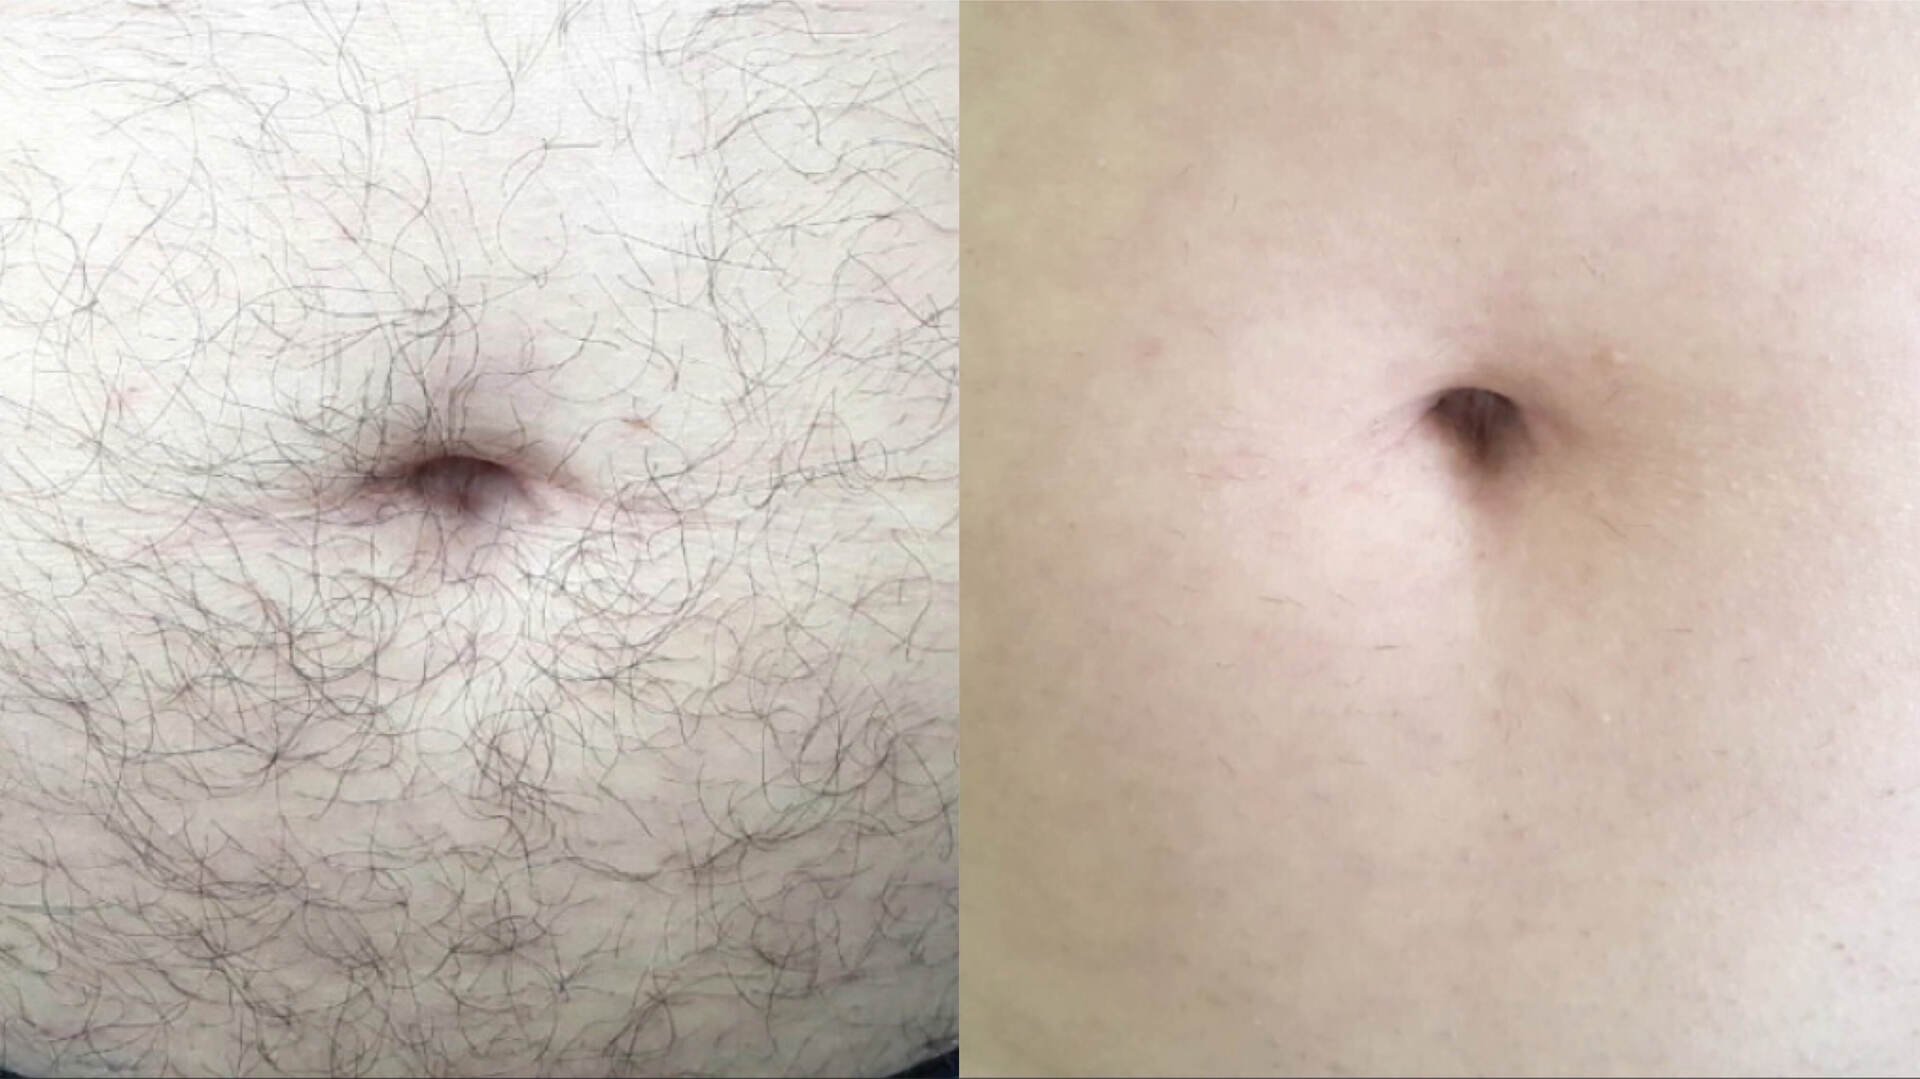 laser-hair-removal-before-after-3